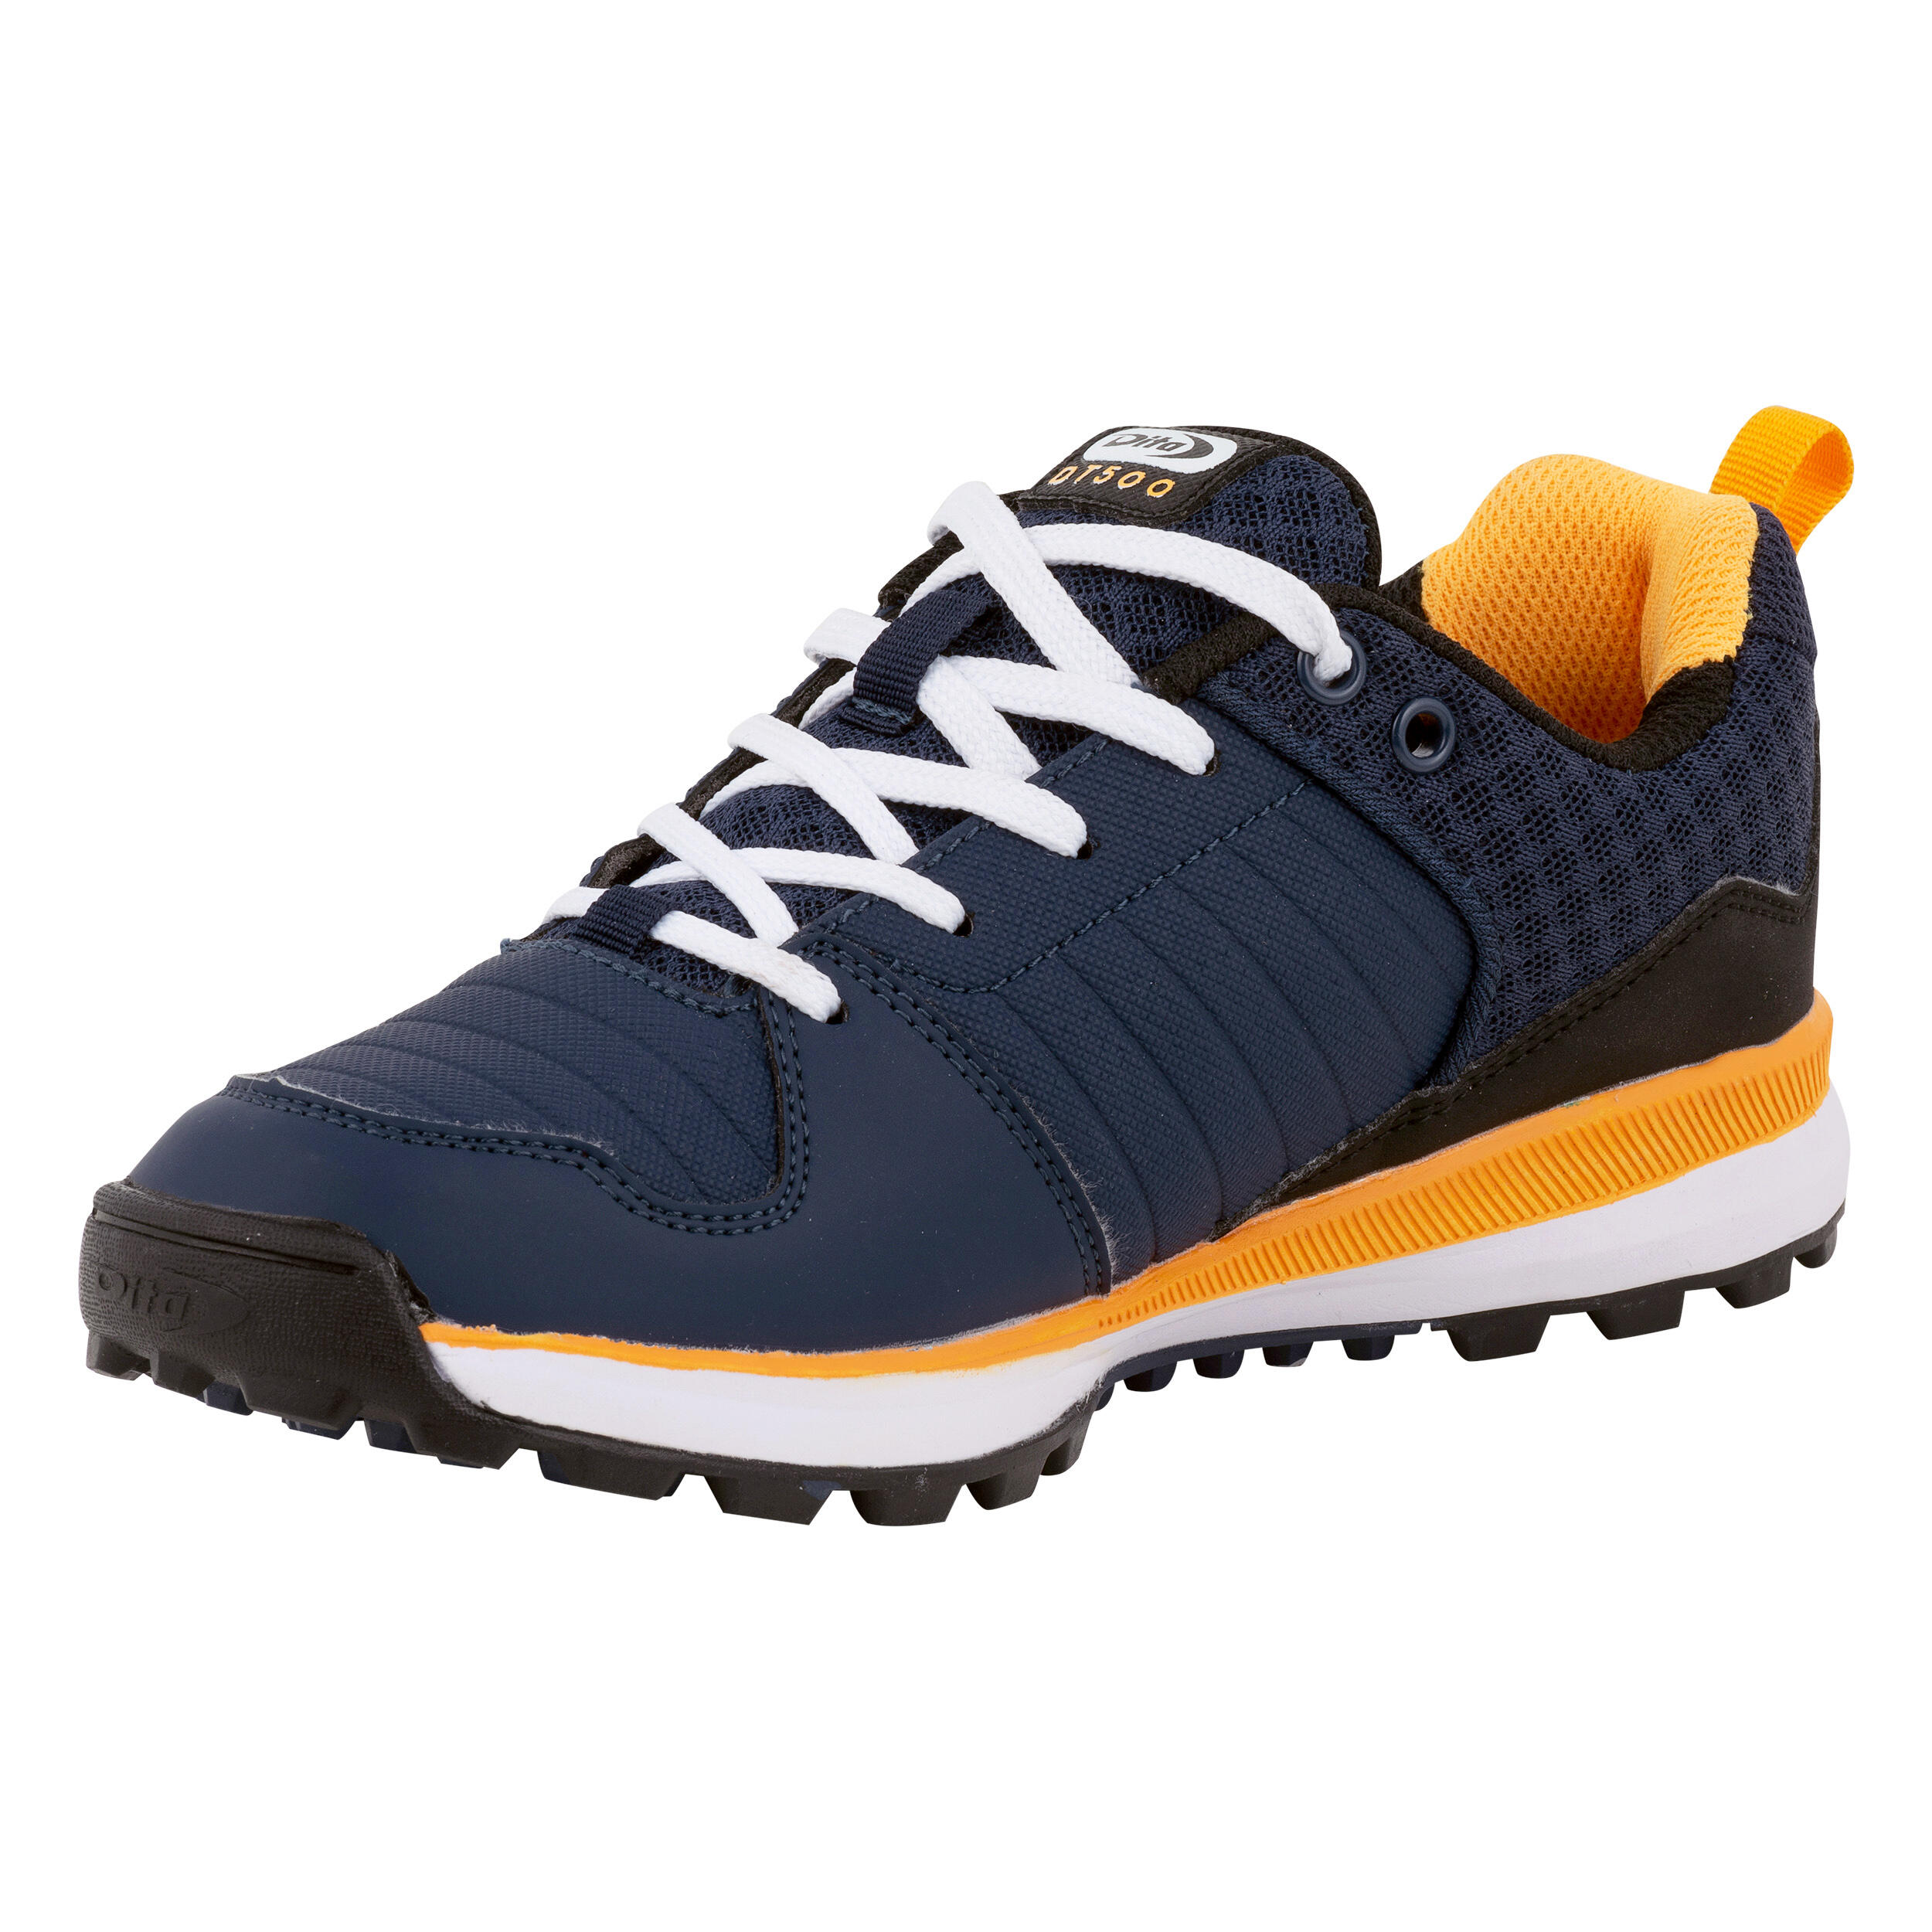 Teens' Moderate-Intensity Hockey Shoes DT500 - Blue/Yellow 2/7